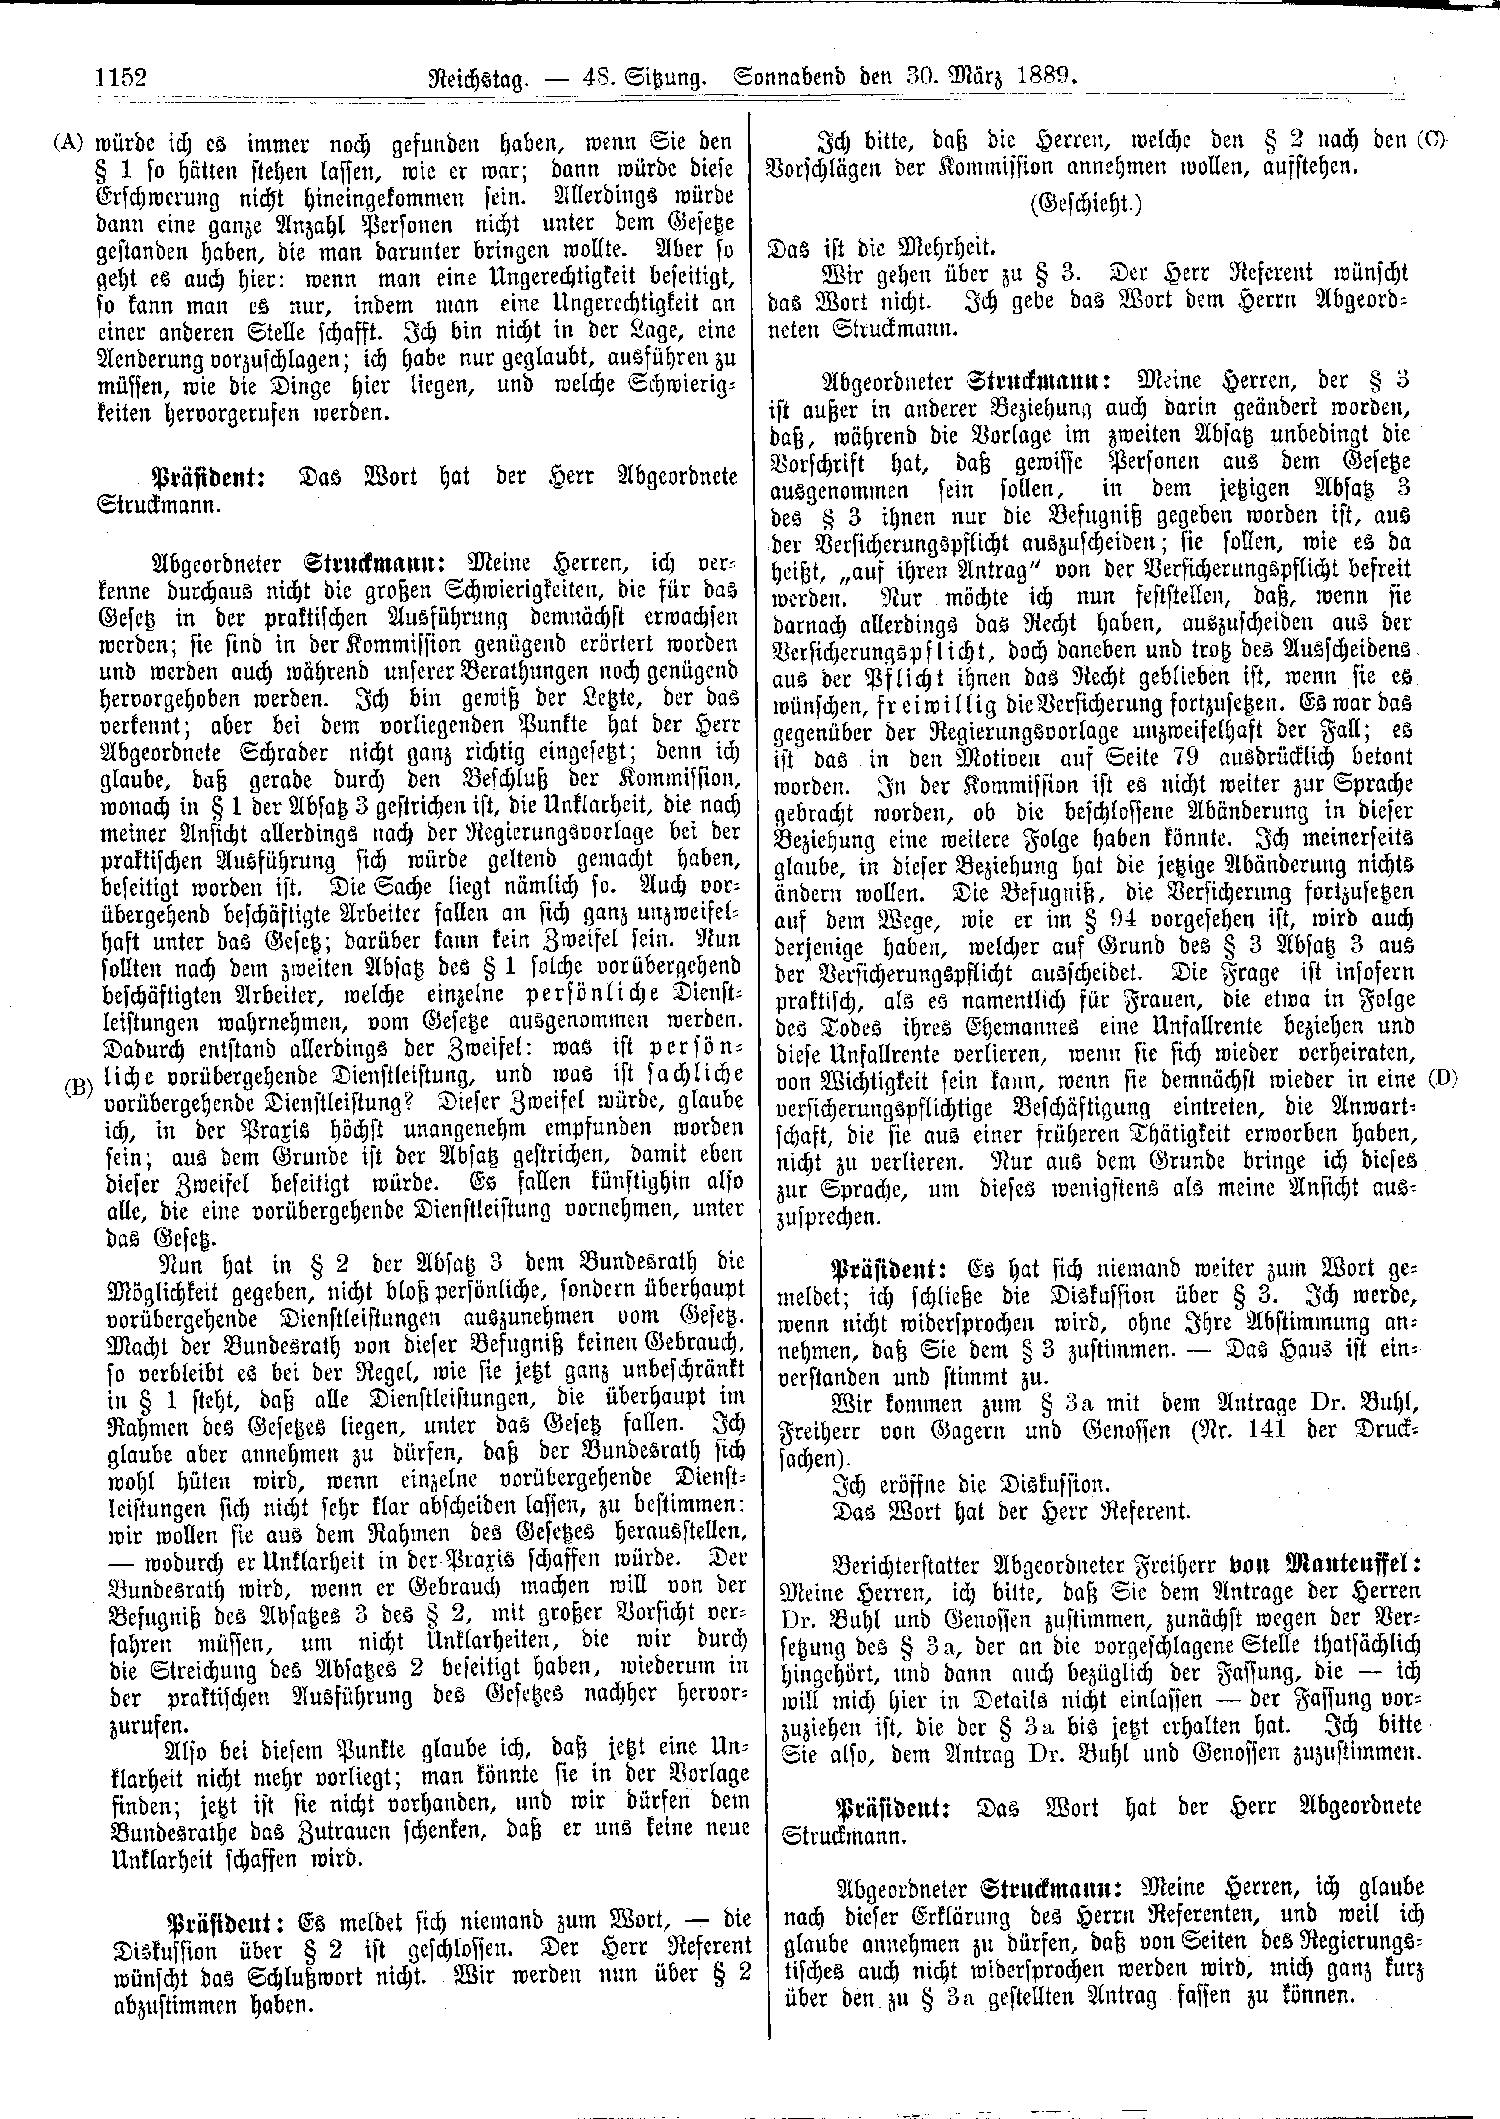 Scan of page 1152